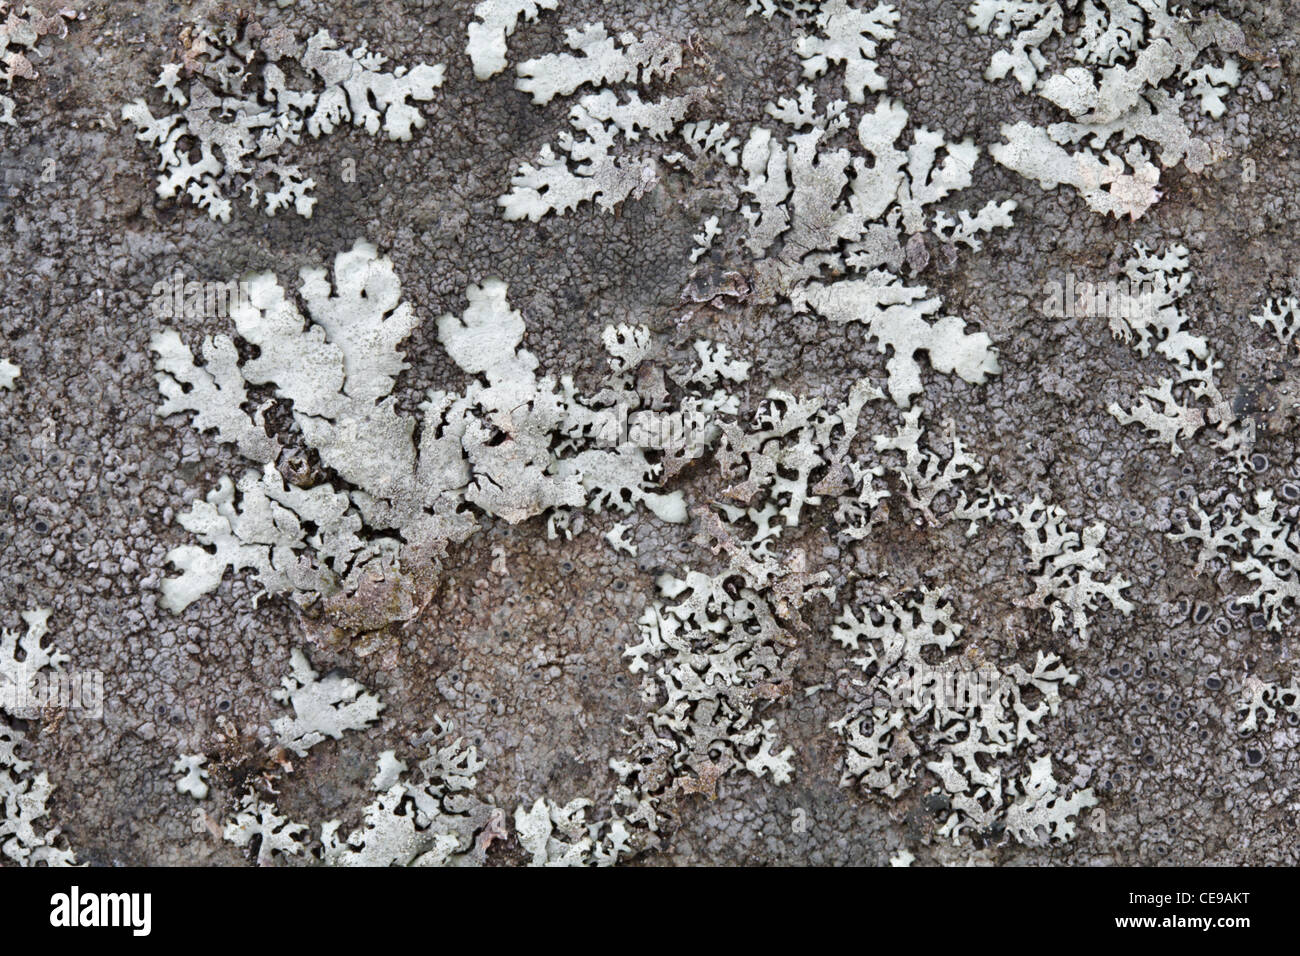 Foliose and crustose lichens growing on a flat rock surface. Stock Photo